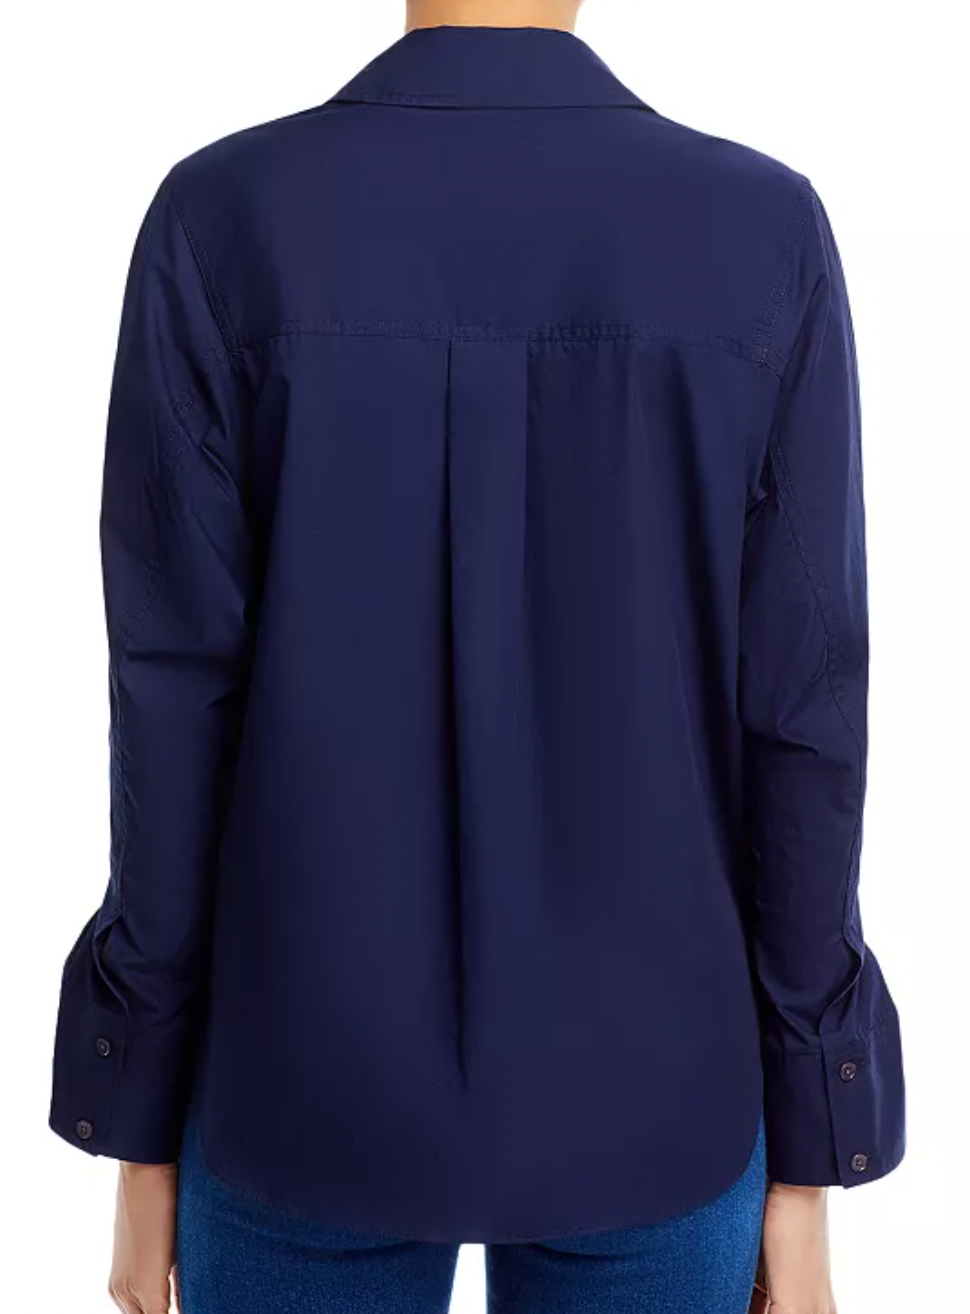 Wesley Blouse